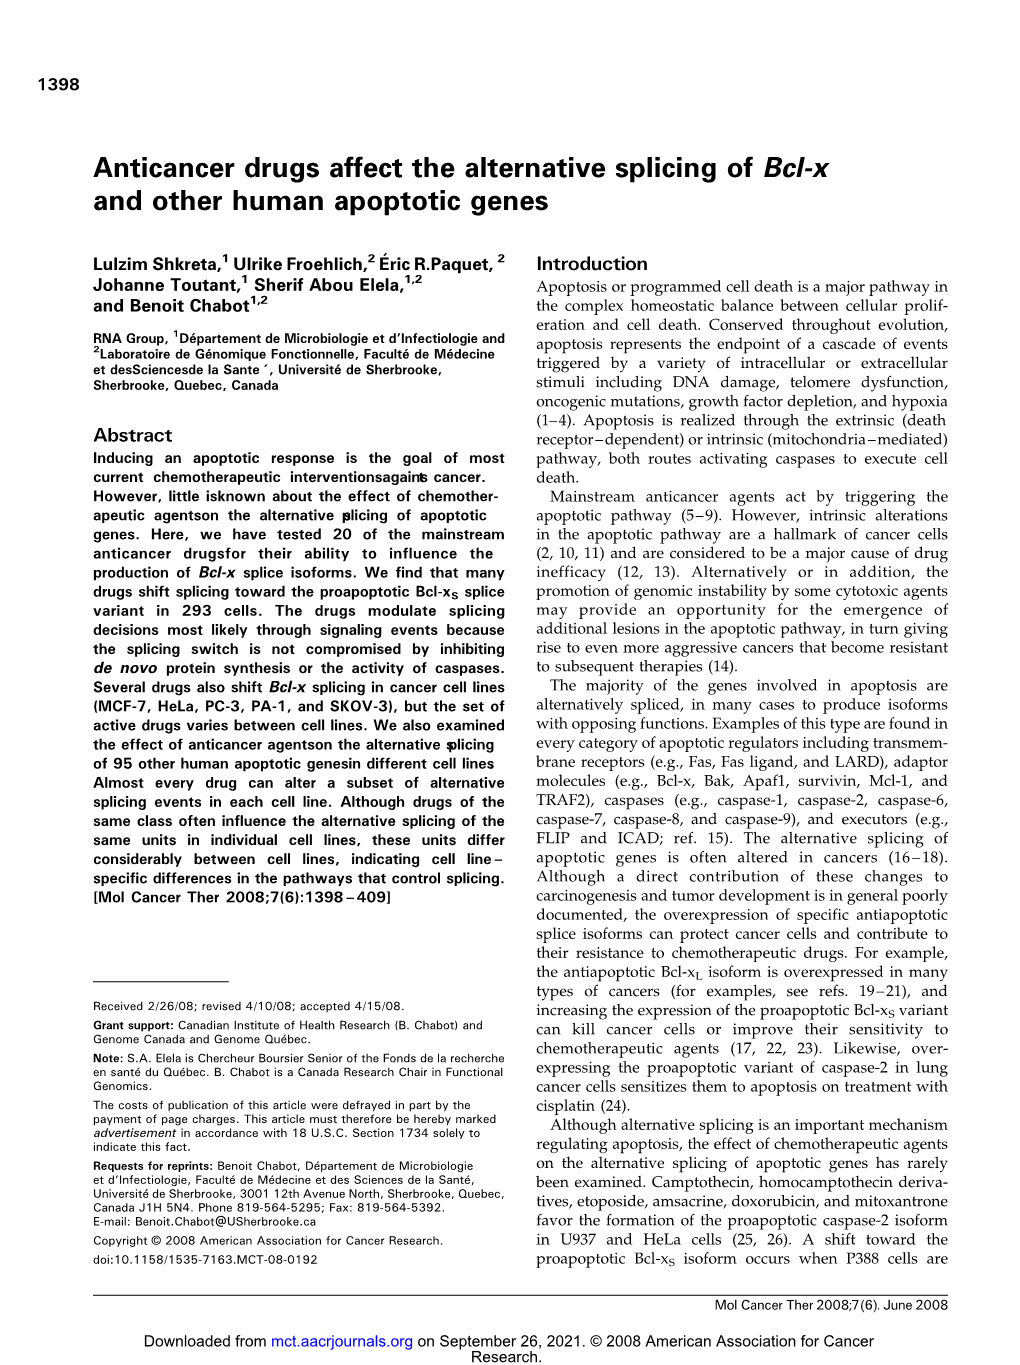 Anticancer Drugs Affect the Alternative Splicing of Bcl-X and Other Human Apoptotic Genes